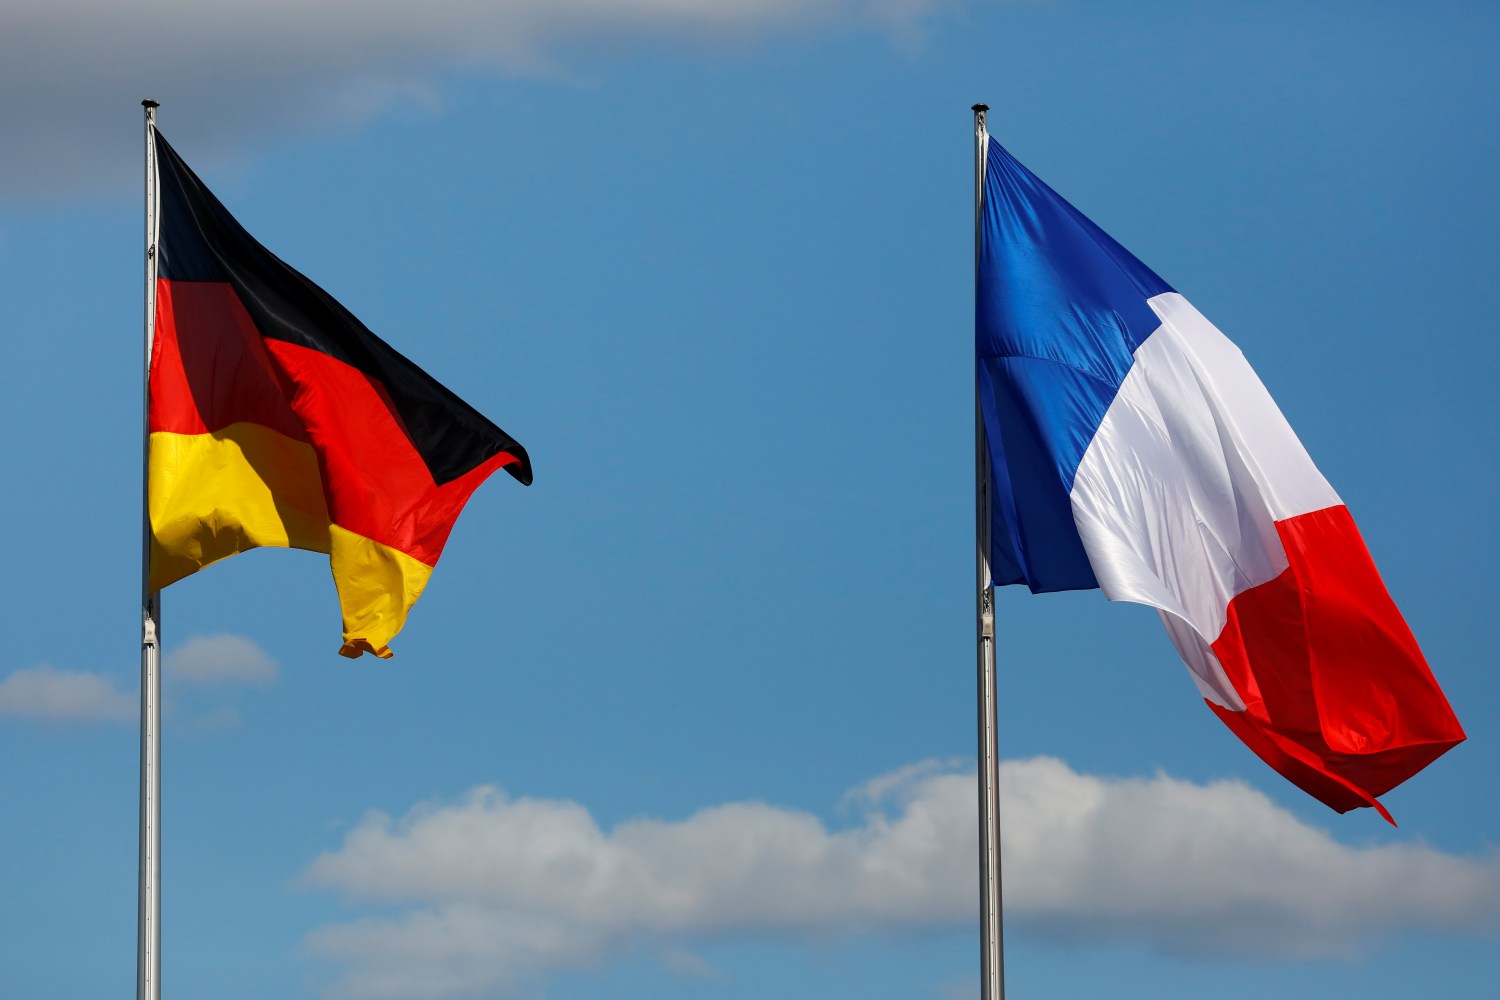 The flags of Germany and France are seen in front of the the Chancellery, before the meeting between German Chancellor Angela Merkel and French President Emmanuel Macron in Berlin, Germany May 15, 2017. REUTERS/Pawel Kopczynski - RC1BF335E170